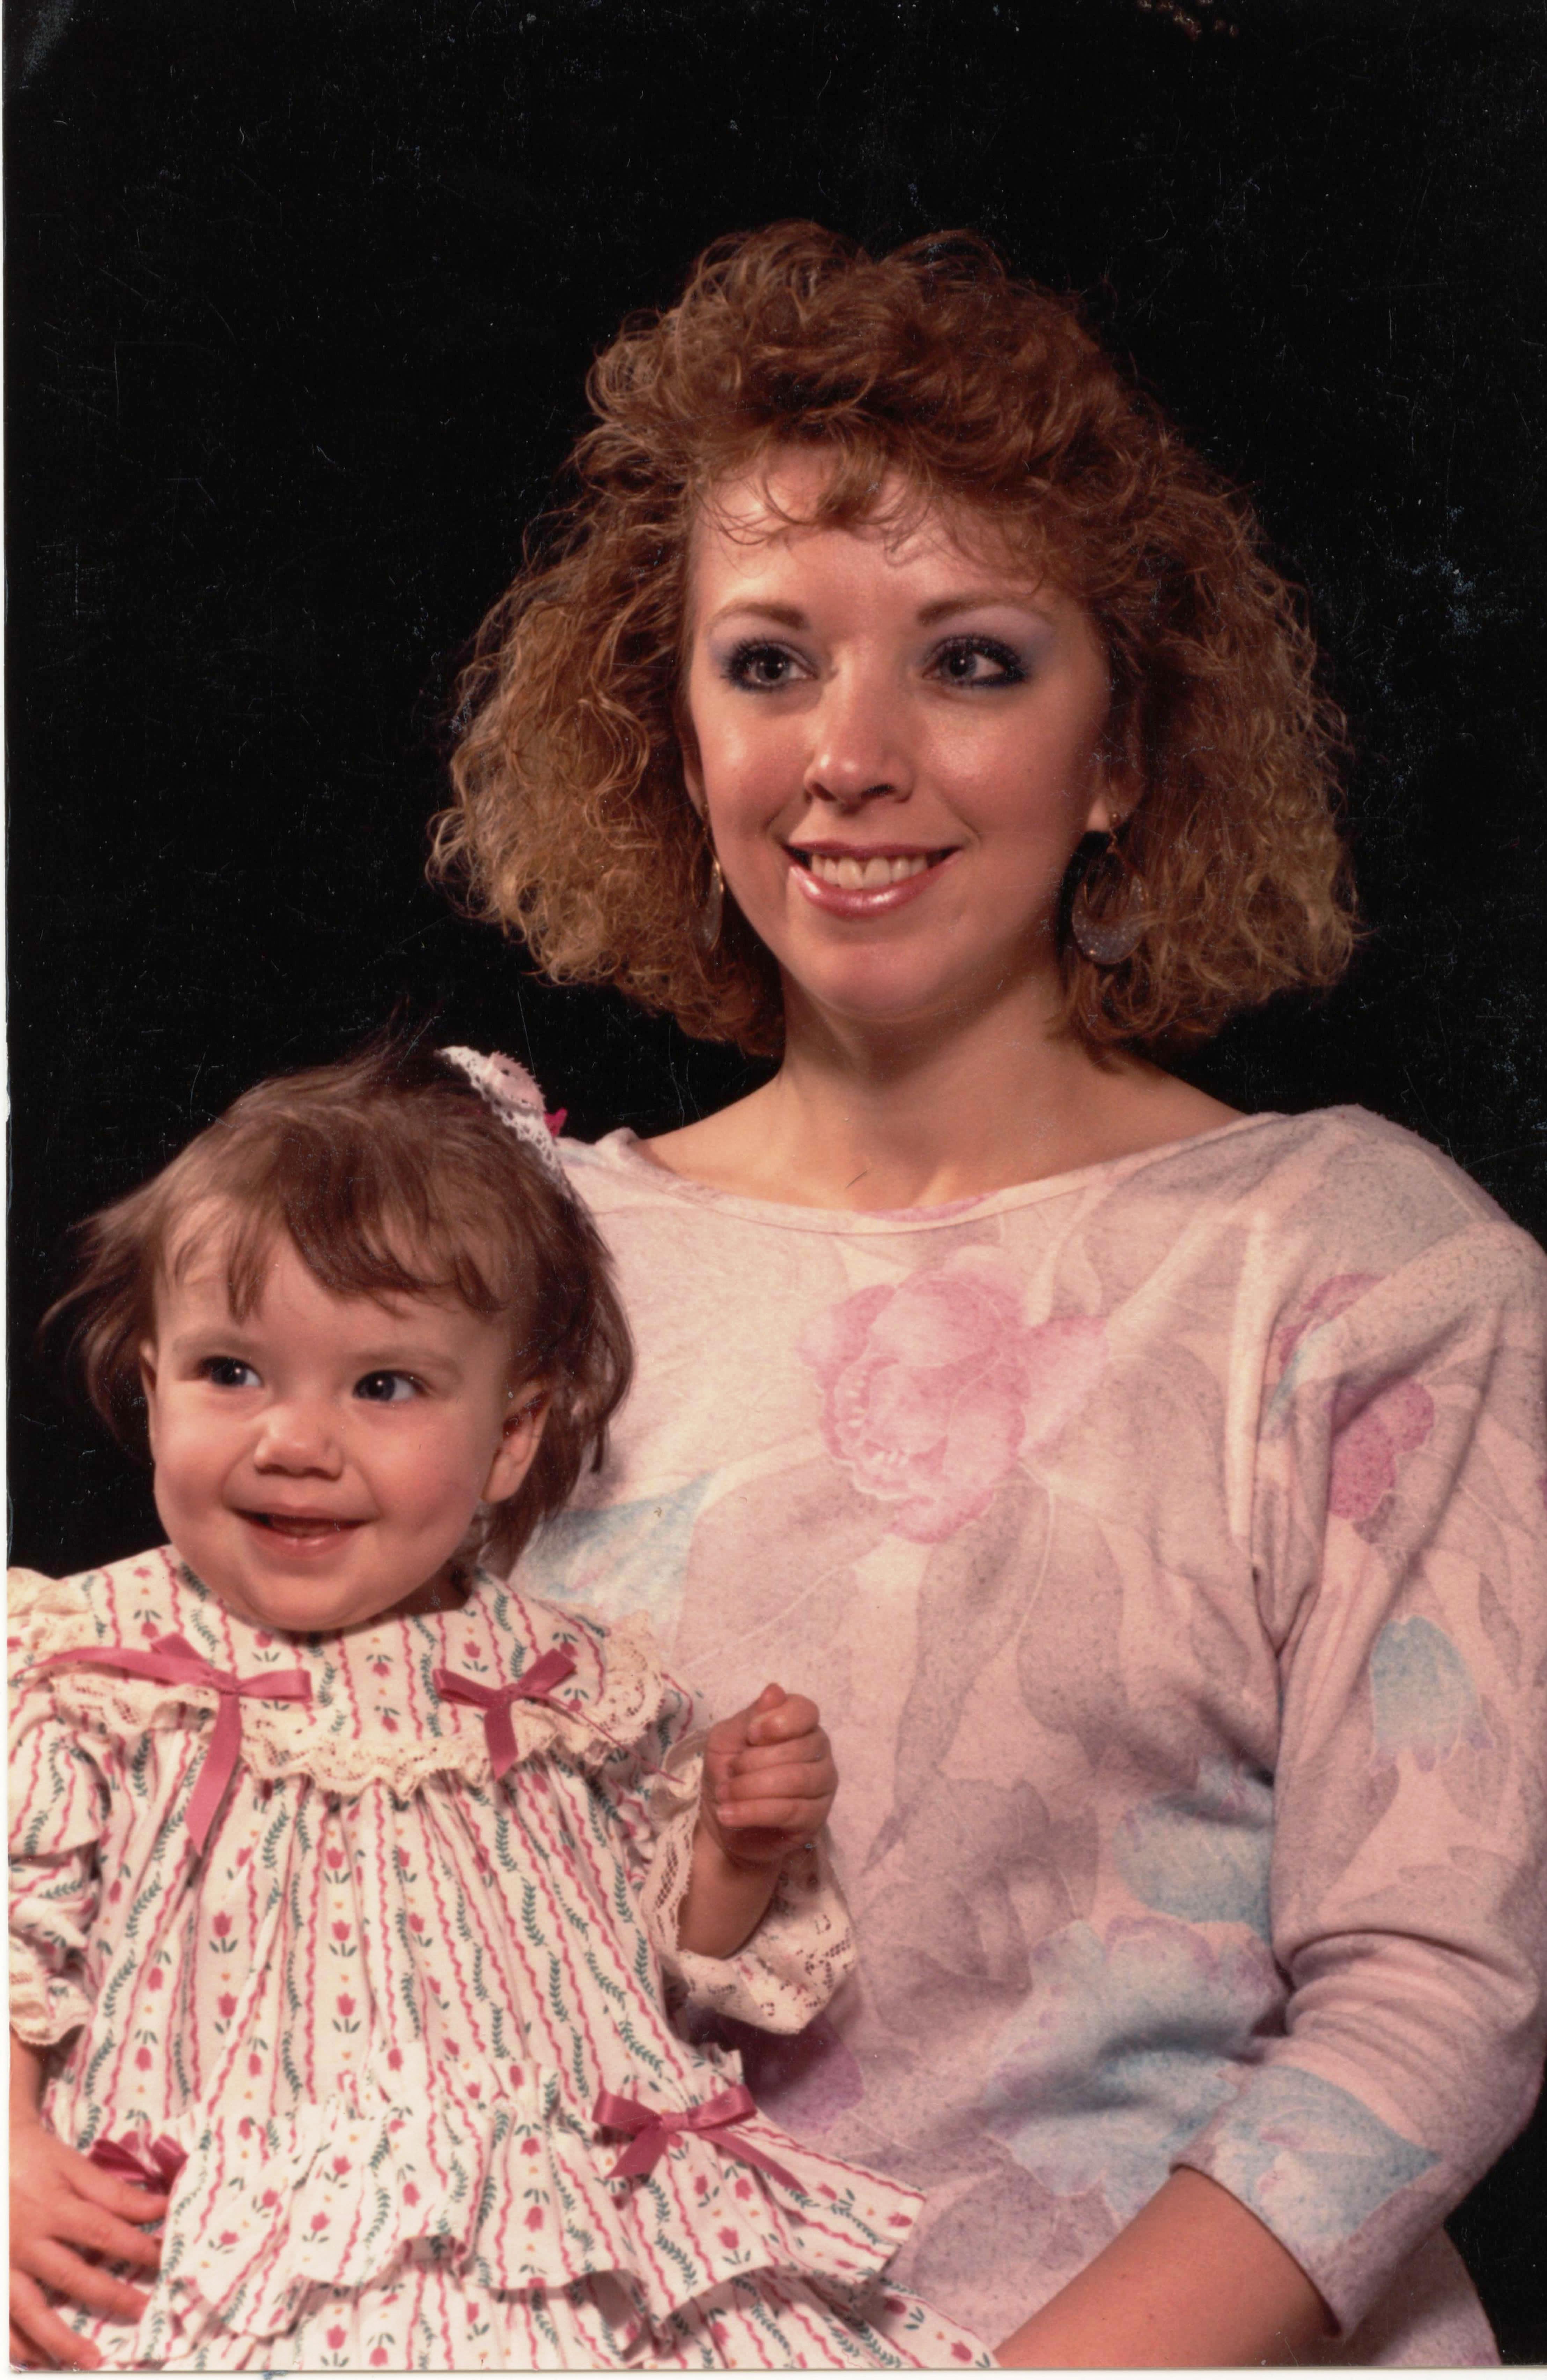 stormie-with-mommy-1986.JPG